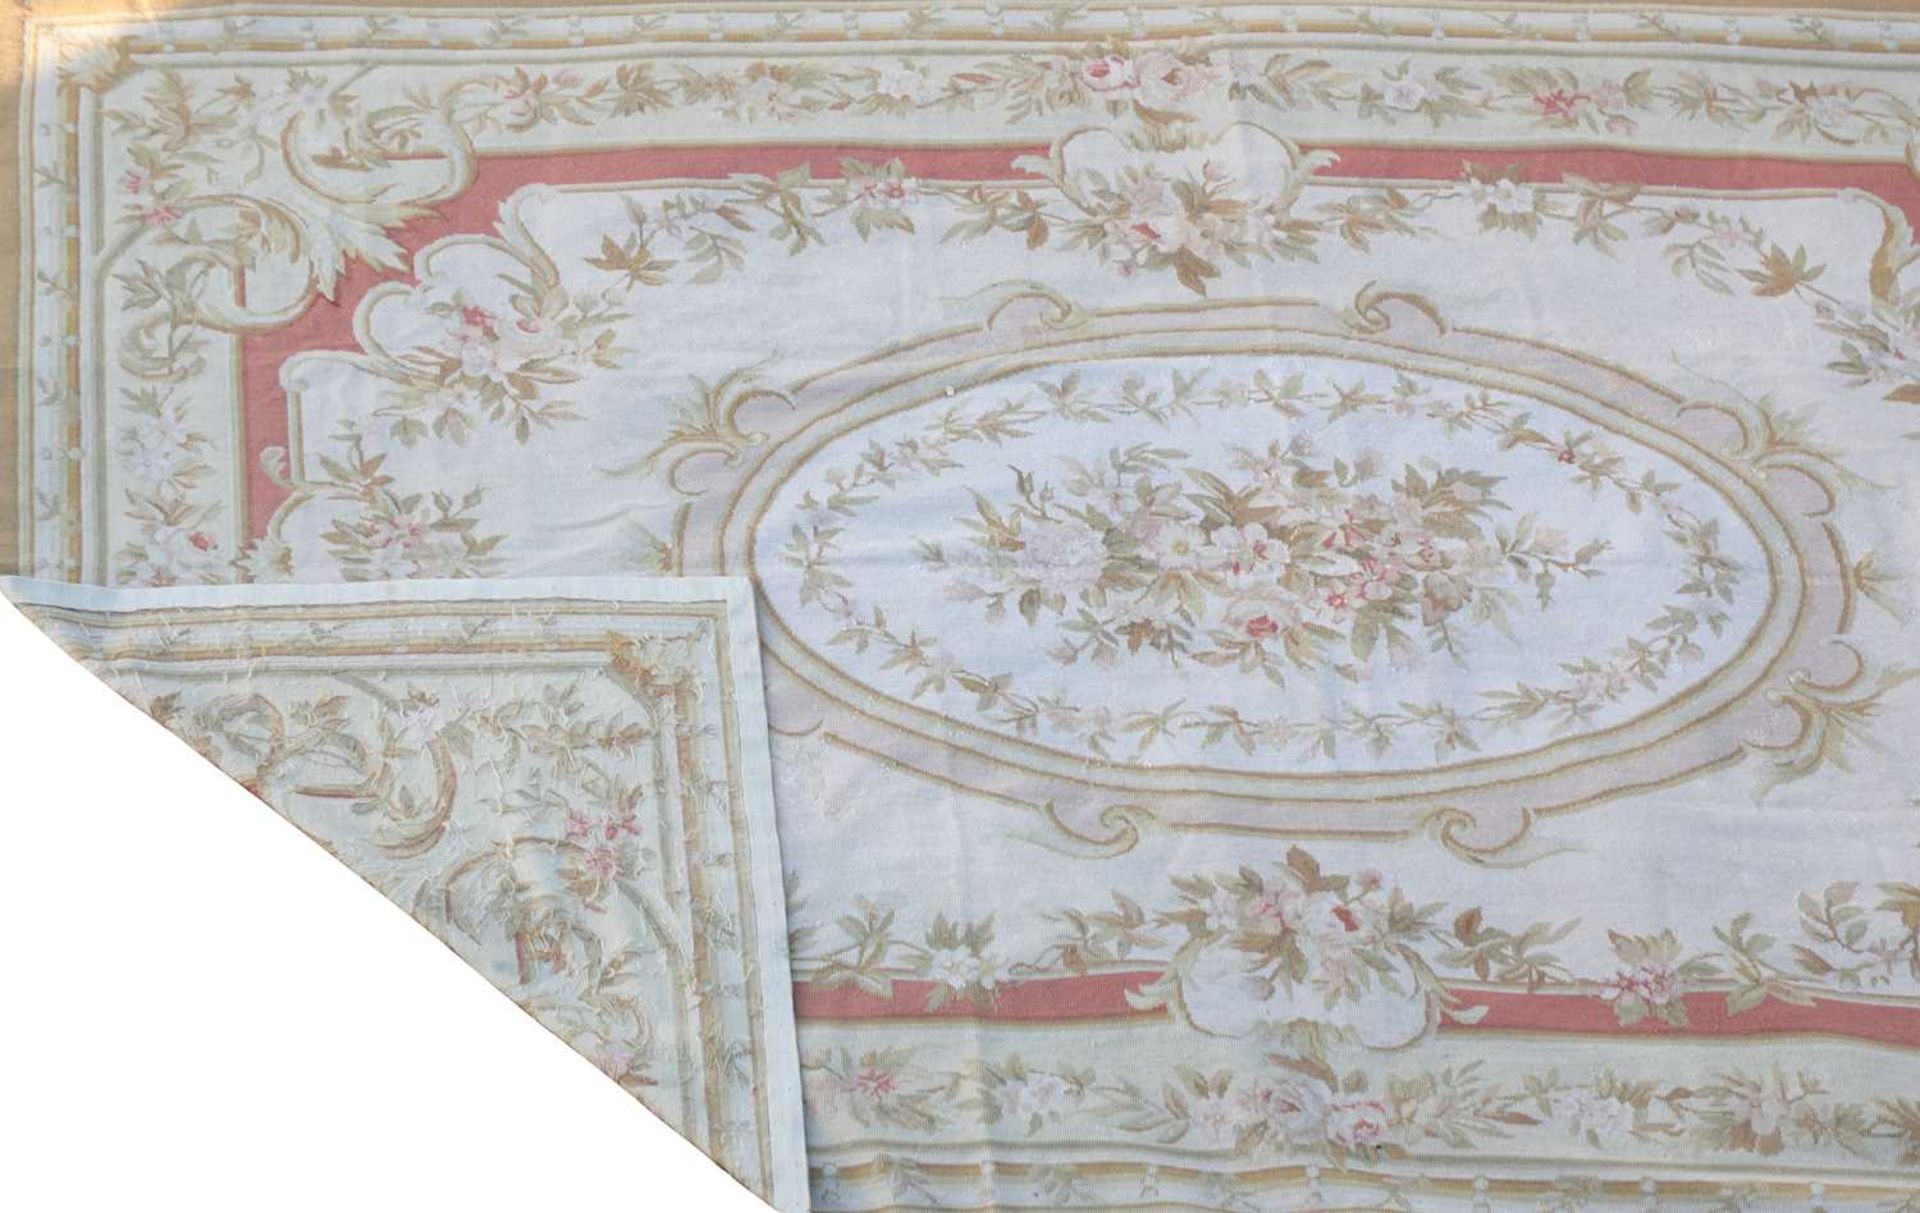 A needlepoint carpet of Aubusson design, - Image 2 of 2